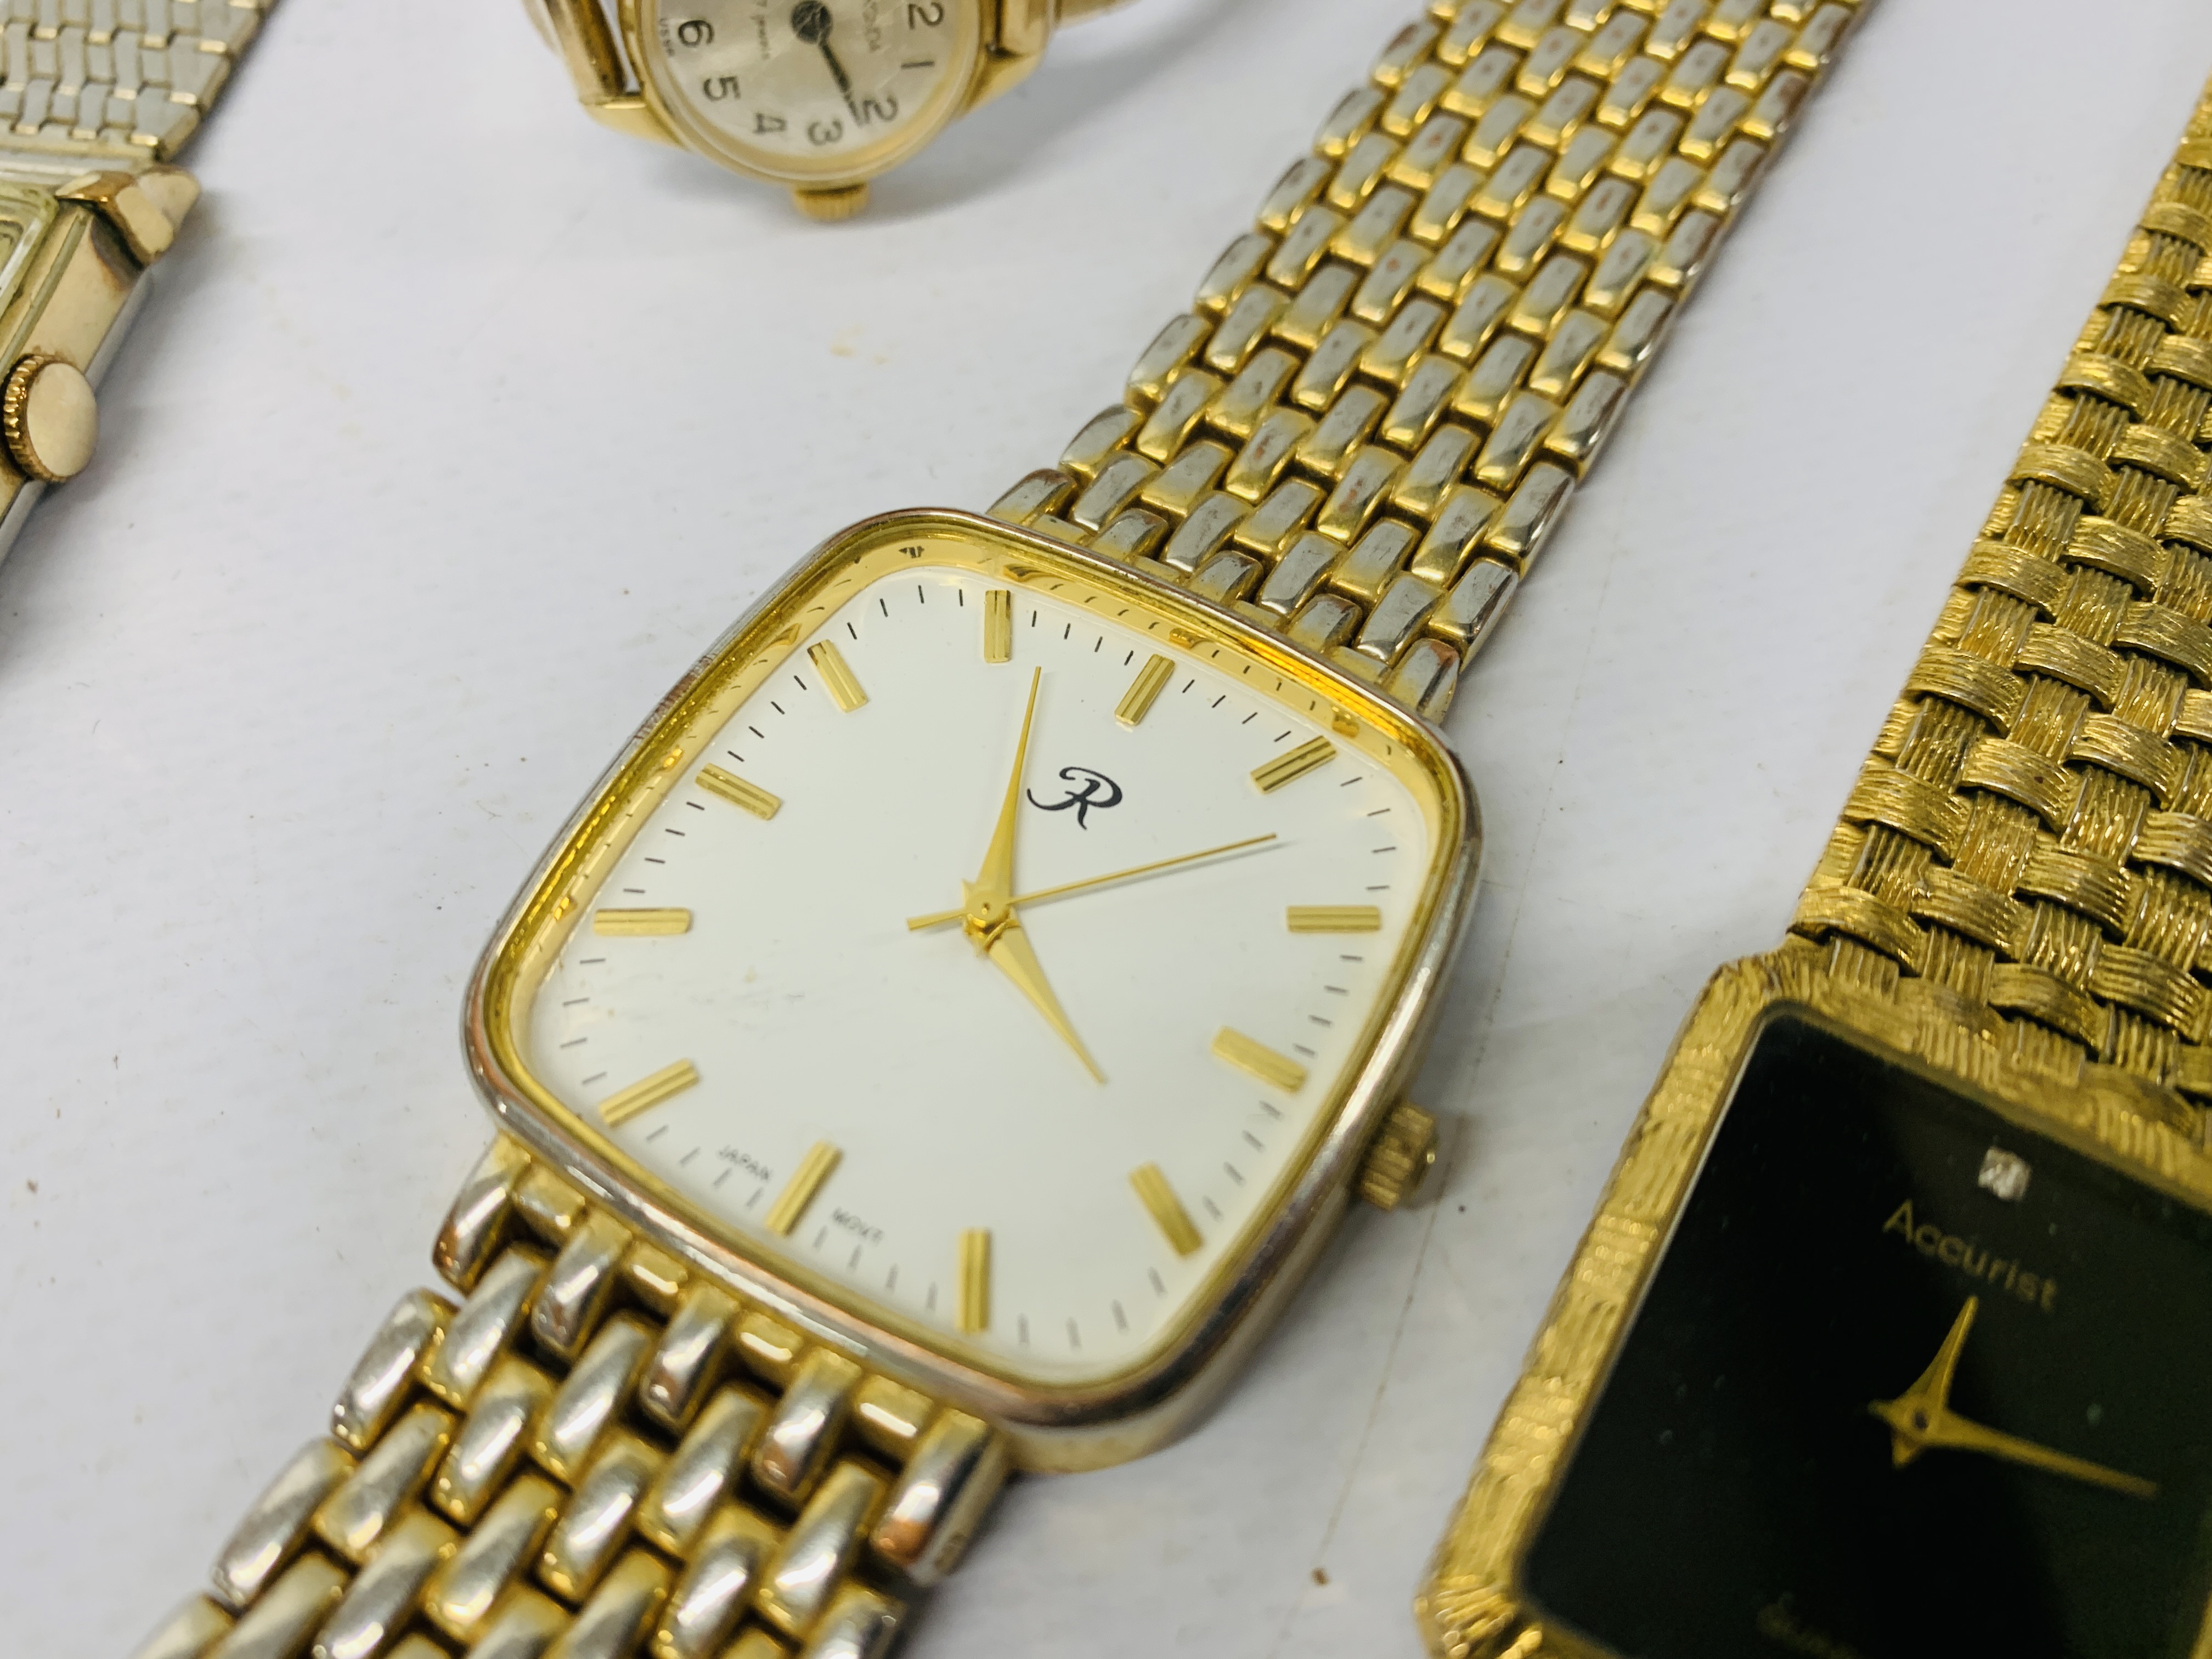 7 X ASSORTED WATCHES / FACES TO INCLUDE WALTHAM - OCEANIC ACCURIST SEKONDA ETC. - Image 3 of 8